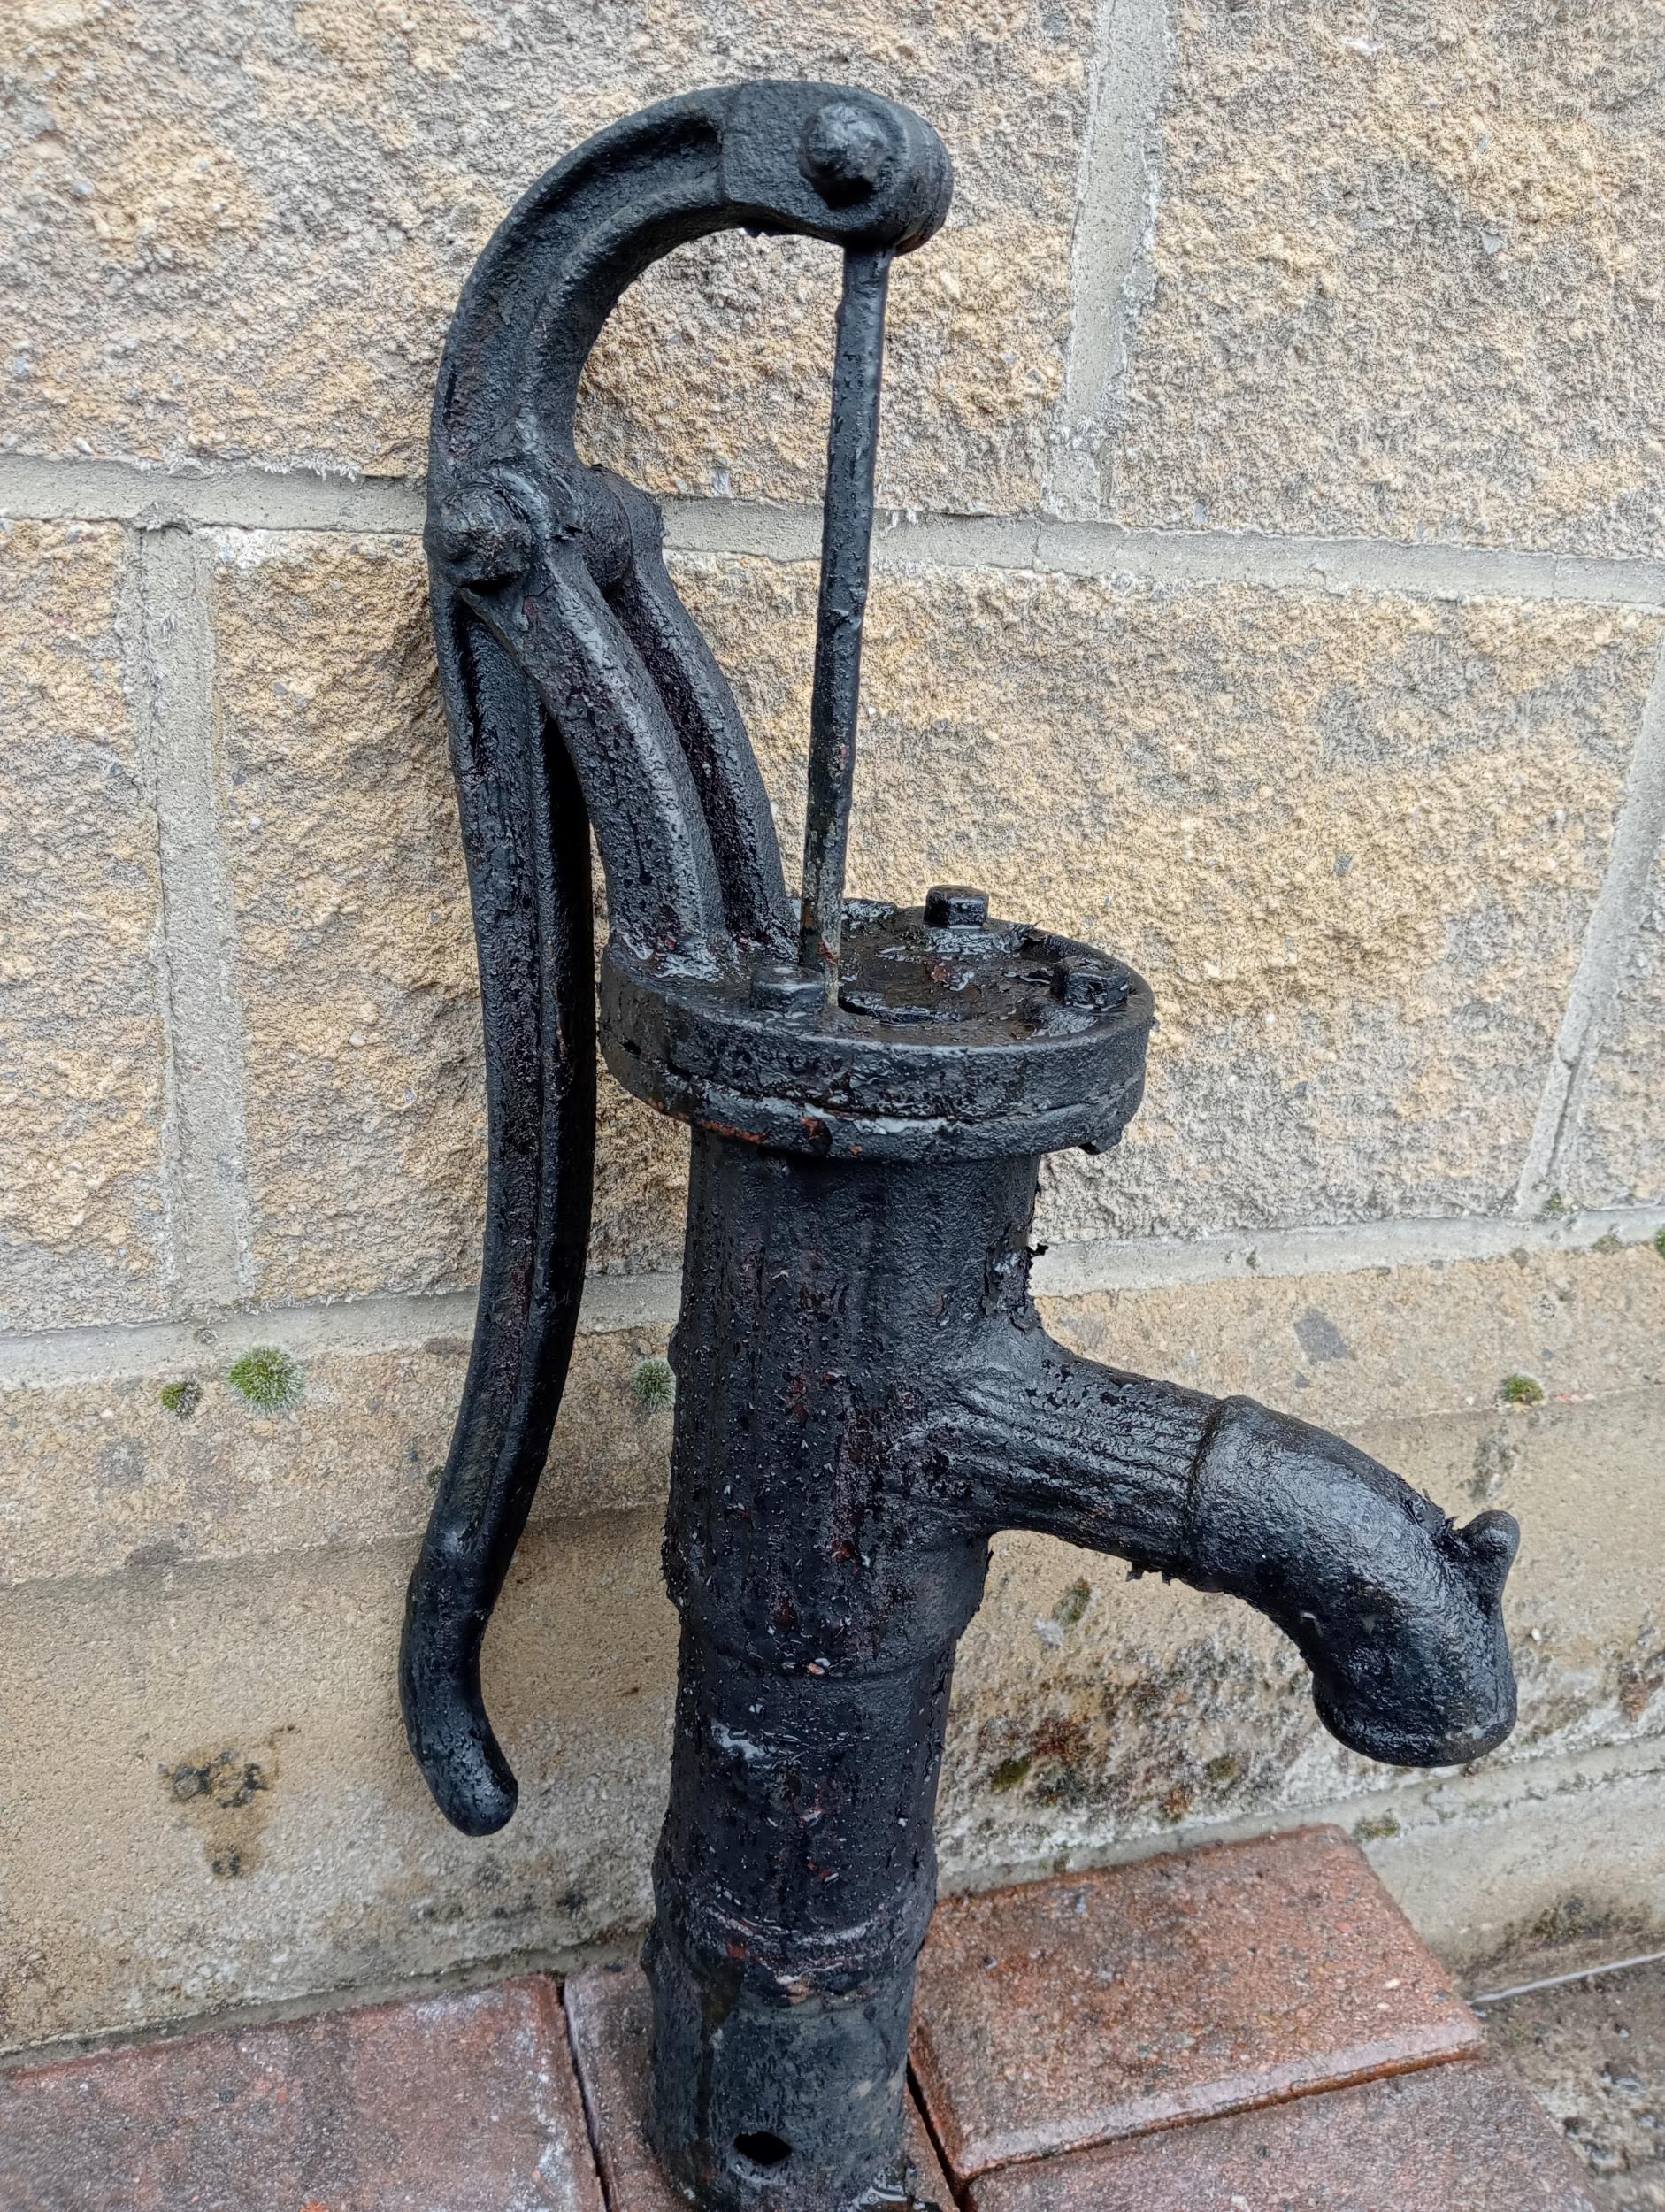 Cast iron water pump {H 60cm x W 30cm x D 15cm }. (NOT AVAILABLE TO VIEW IN PERSON) - Image 2 of 2